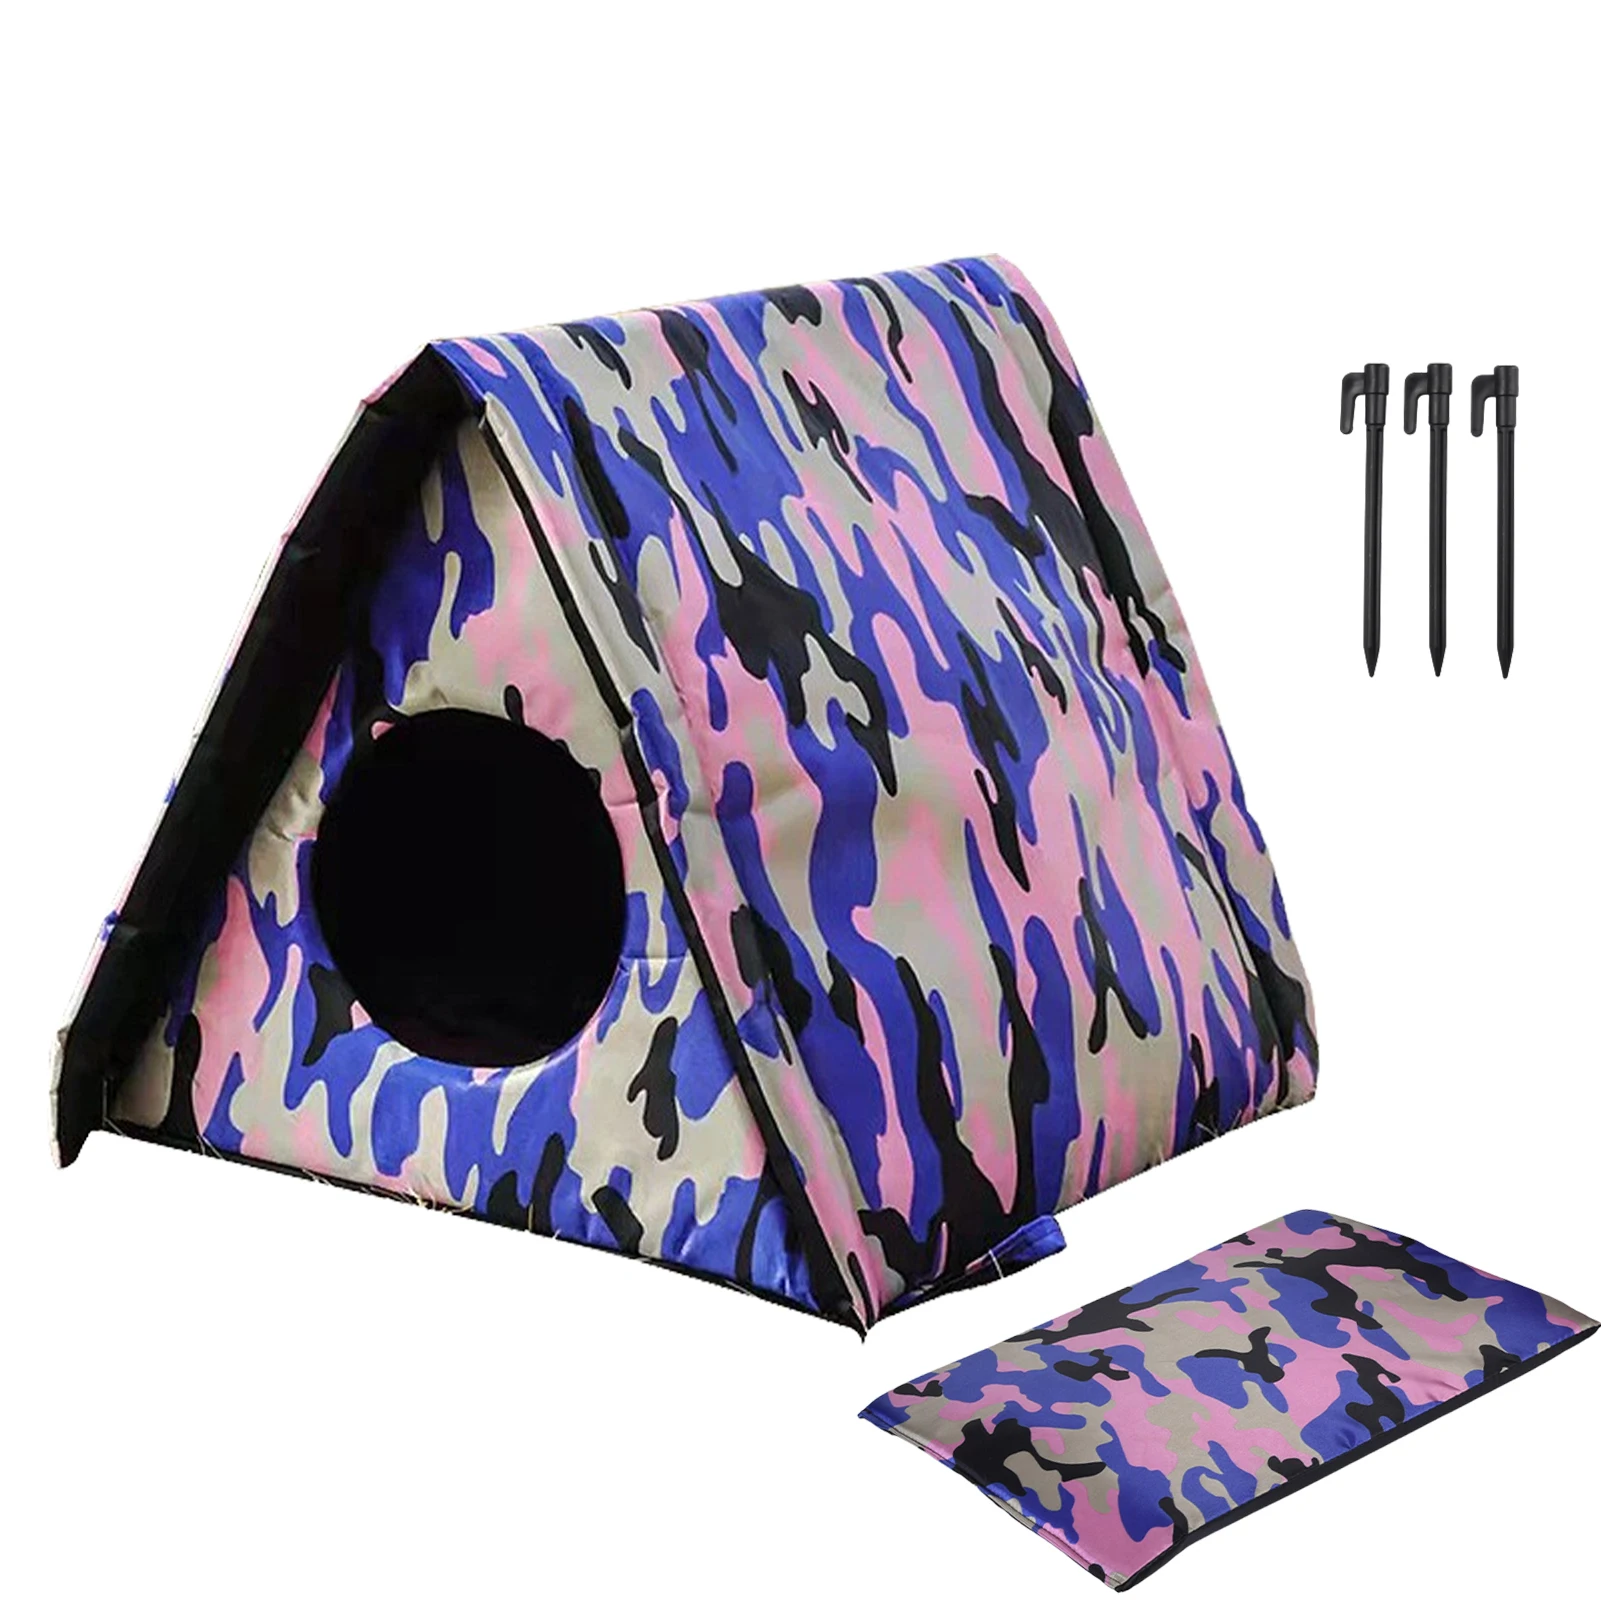 

Stray Cat Shelter Outdoor Waterproof Cat Houses For Outdoor Cats Washable And Foldable Cat Kennel Cave House Small Dog Tent